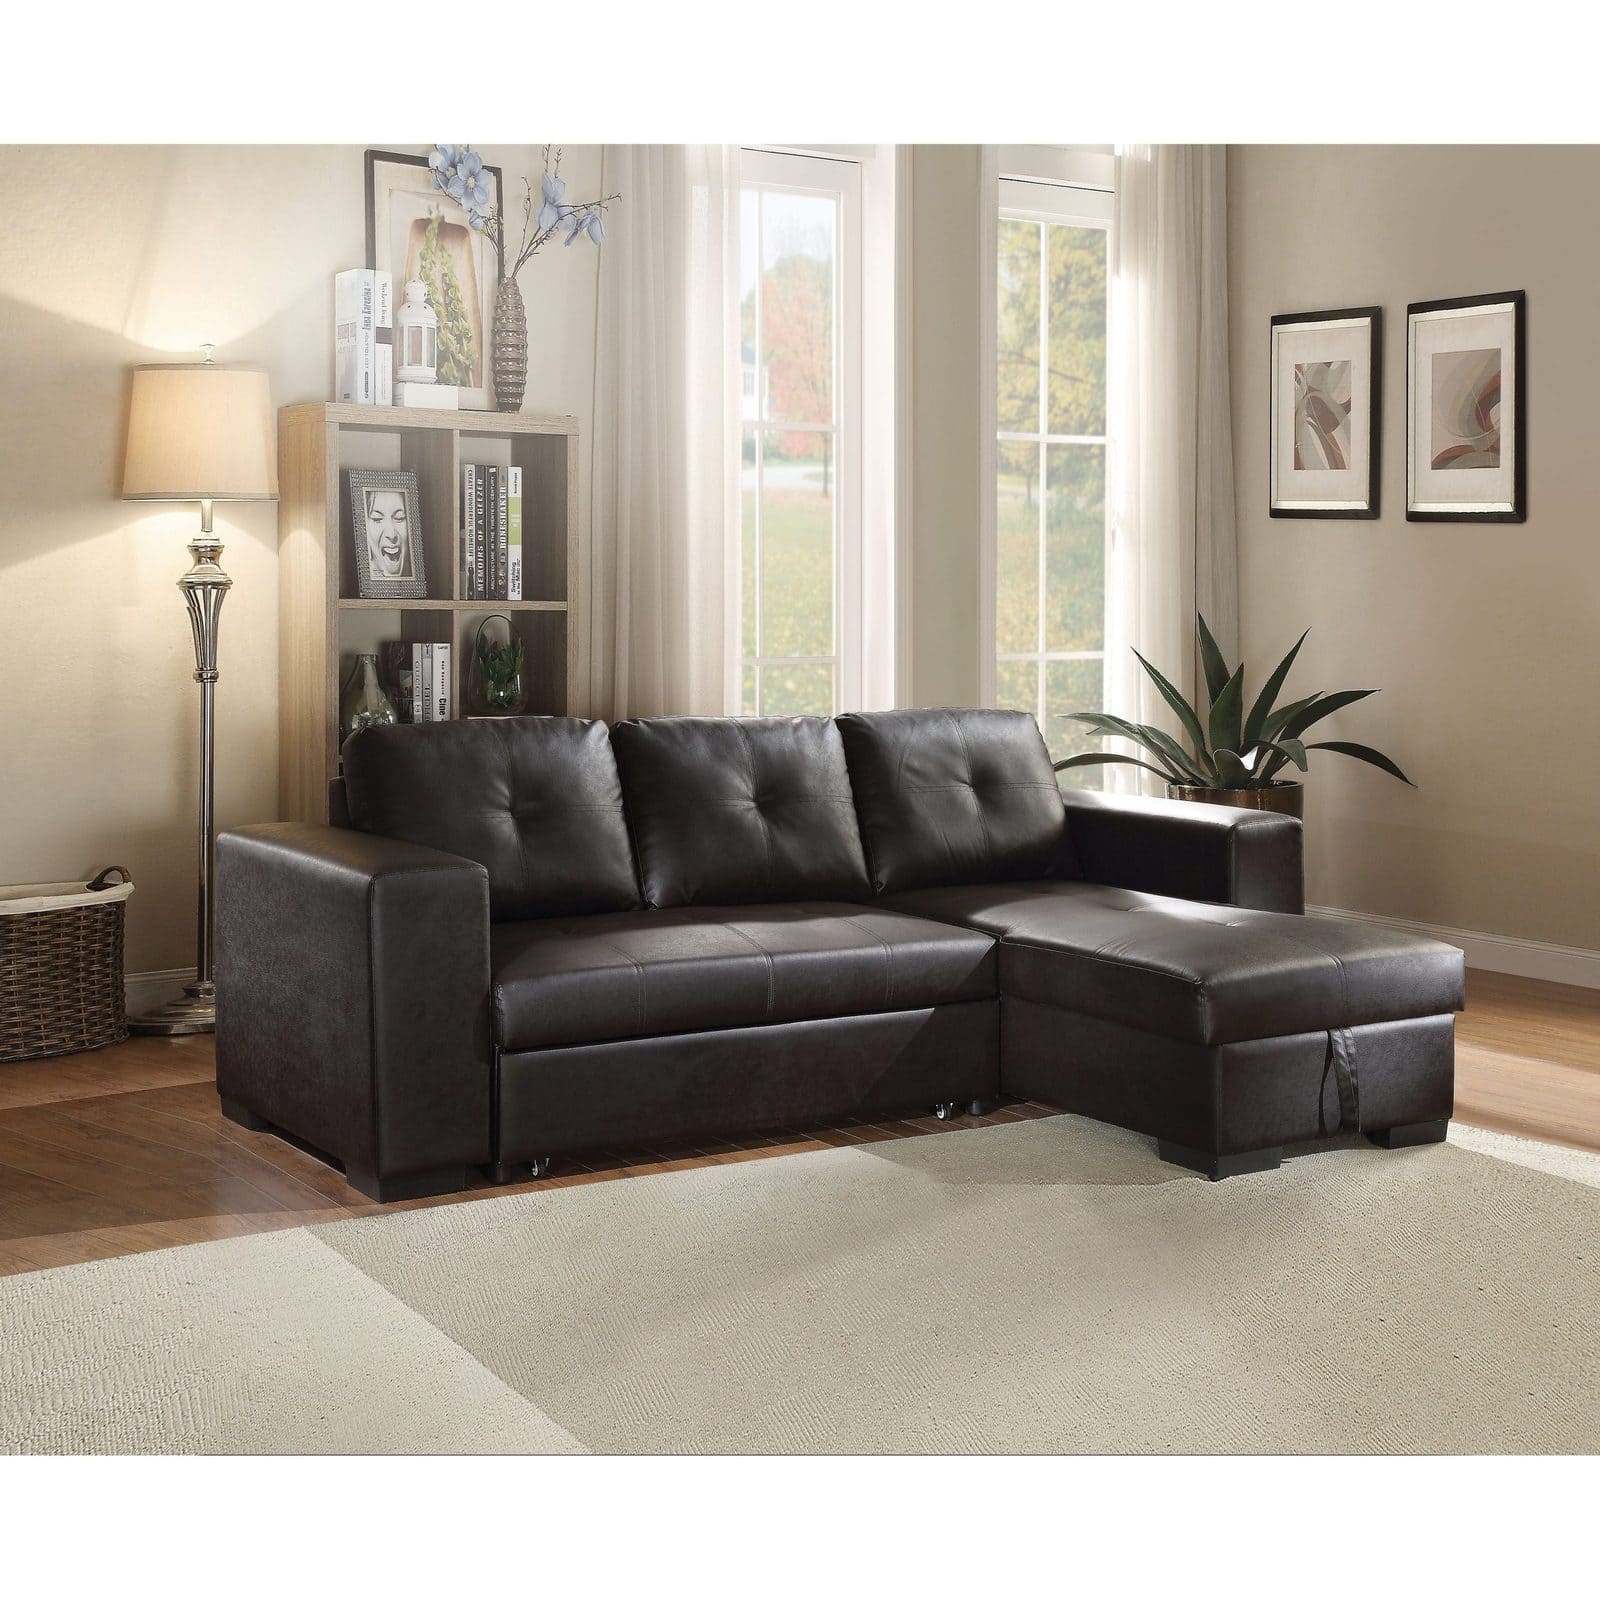 Contrast Your Light Tan Walls with a Black Sofa